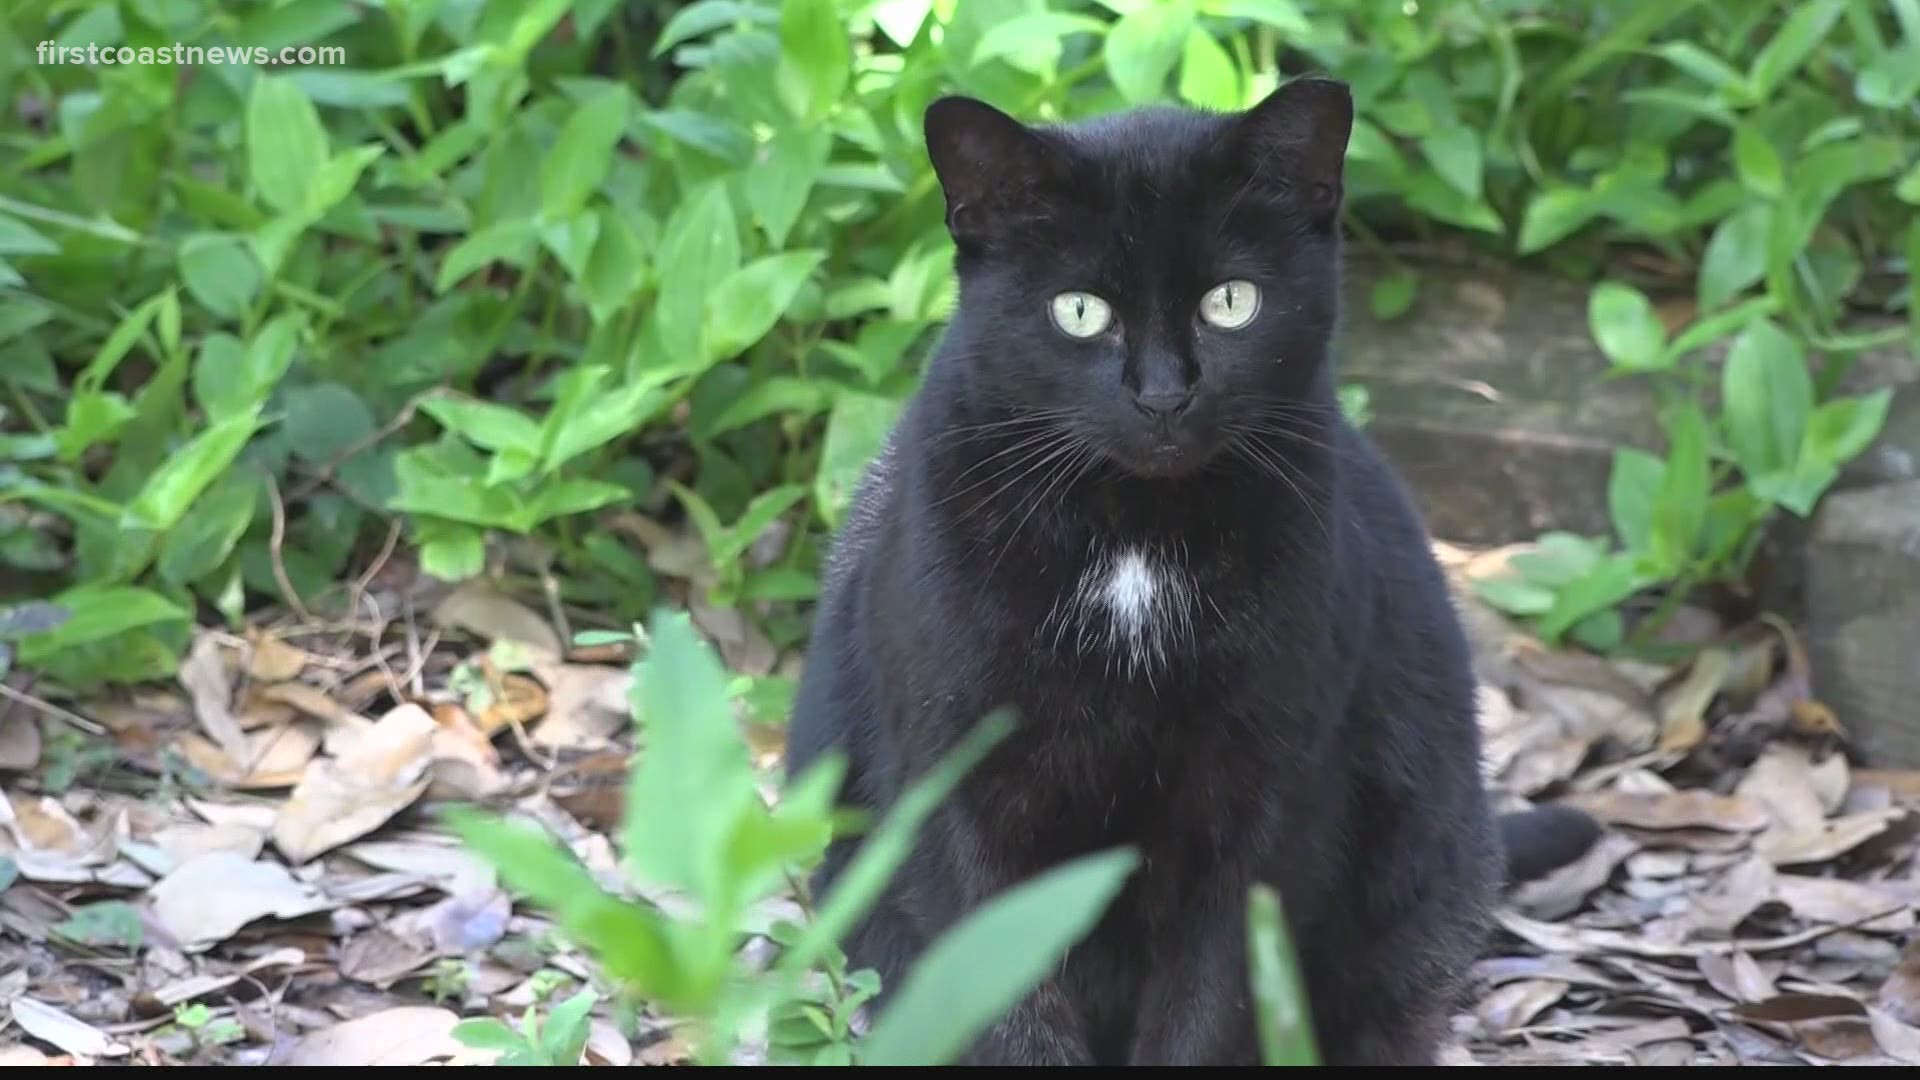 Police investigating community cats shot and killed in Duval County